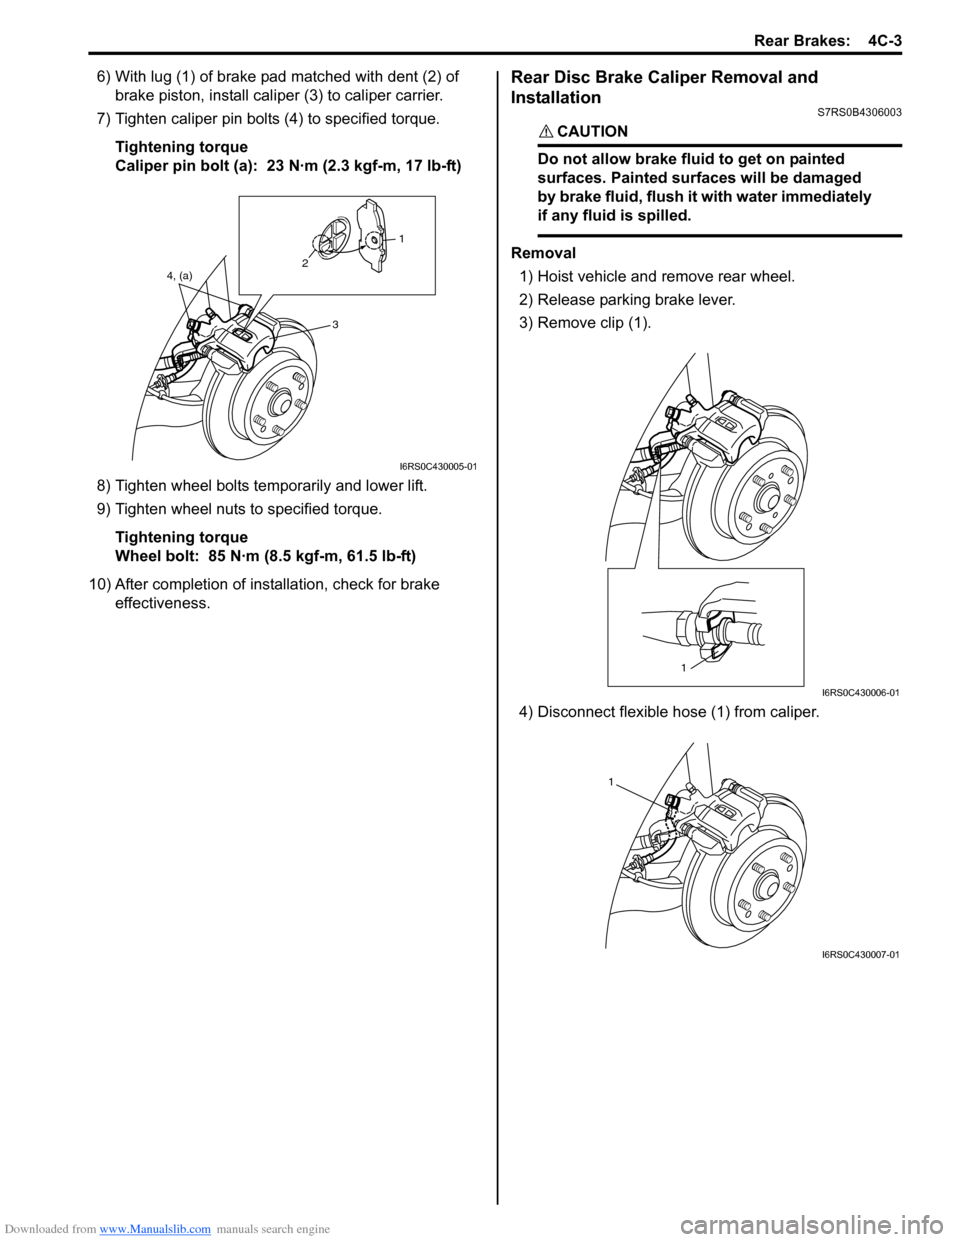 SUZUKI SWIFT 2007 2.G Service Owners Guide Downloaded from www.Manualslib.com manuals search engine Rear Brakes:  4C-3
6) With lug (1) of brake pad matched with dent (2) of brake piston, install caliper  (3) to caliper carrier.
7) Tighten cali